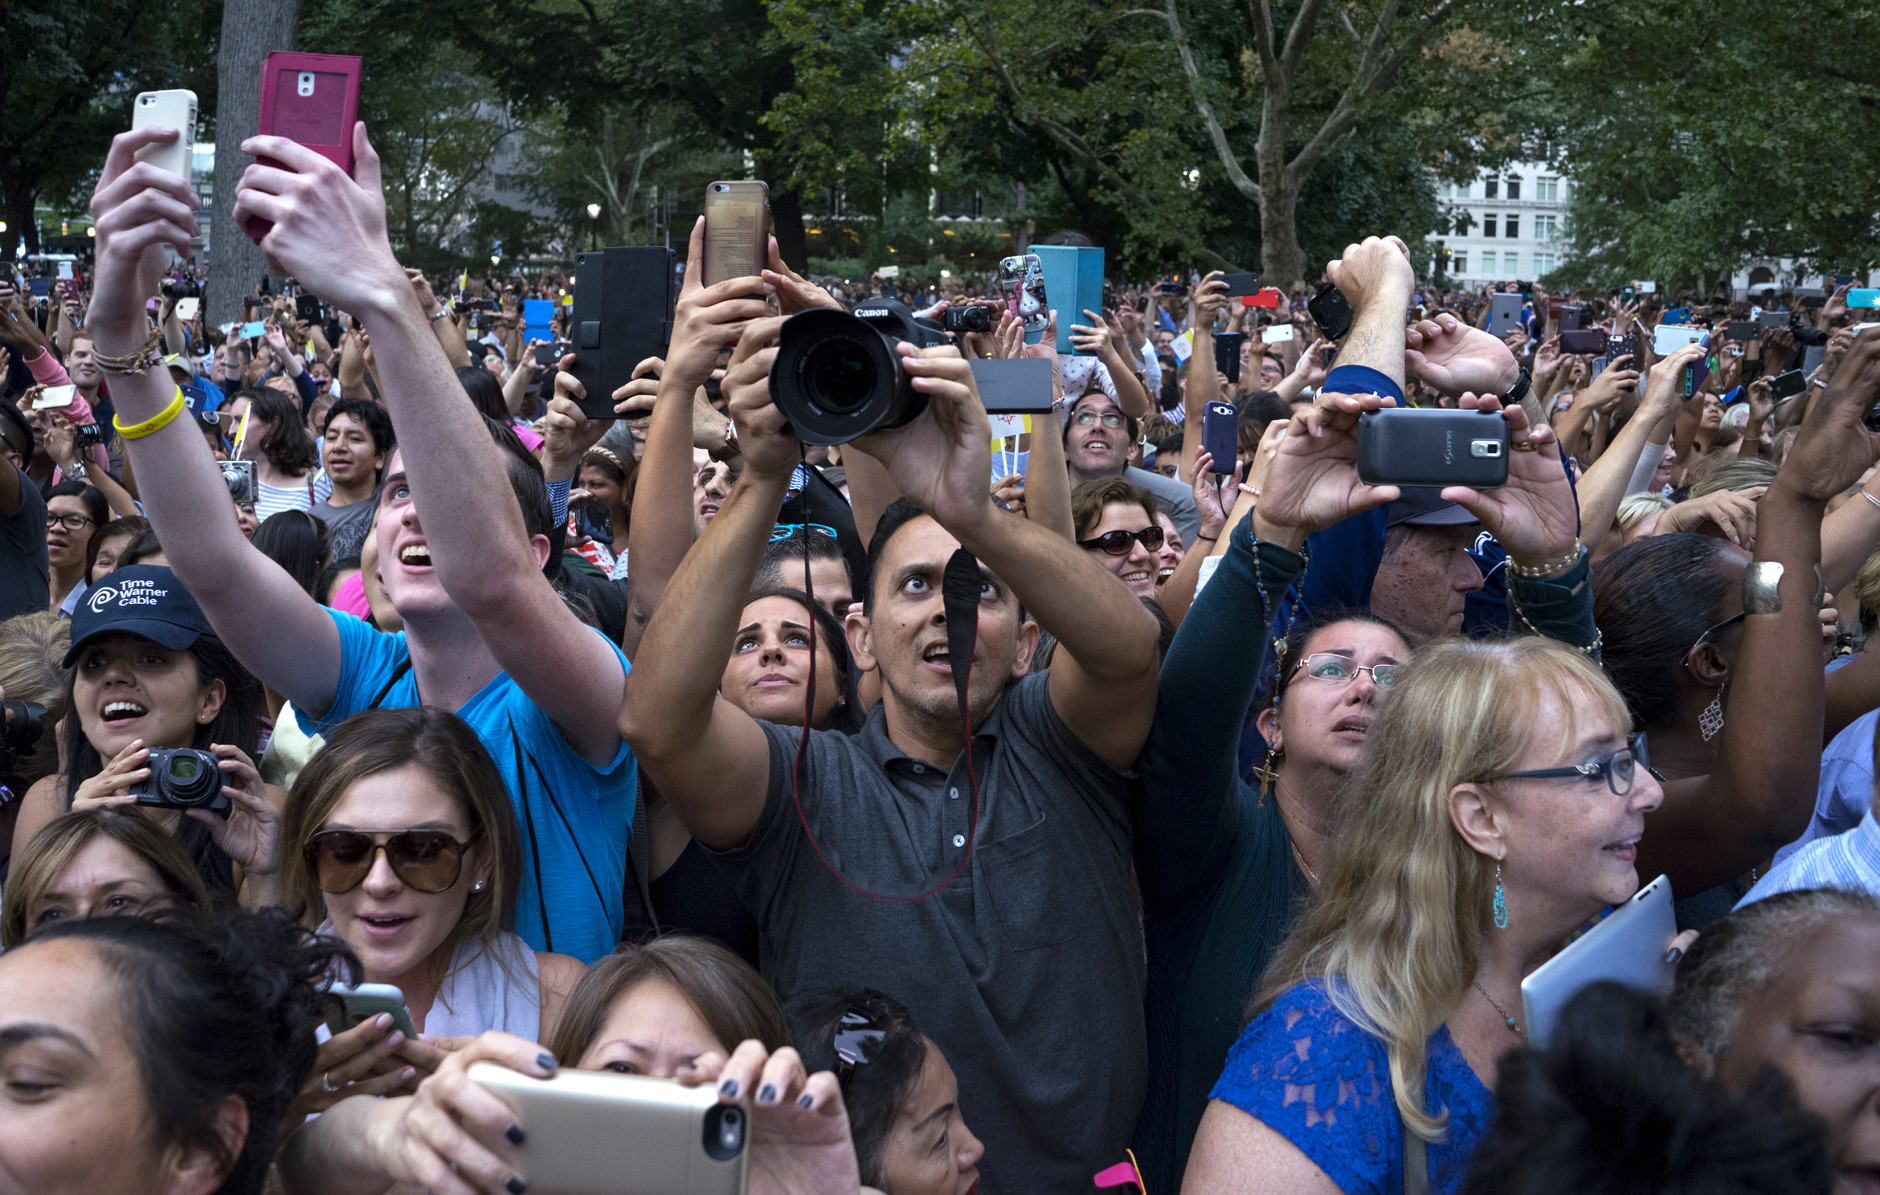 Well-wishers stretch to take photos as Pope Francis passed by while traveling in a motorcade in New York's Central Park, Friday, Sept. 25, 2015. (AP Photo/Craig Ruttle)